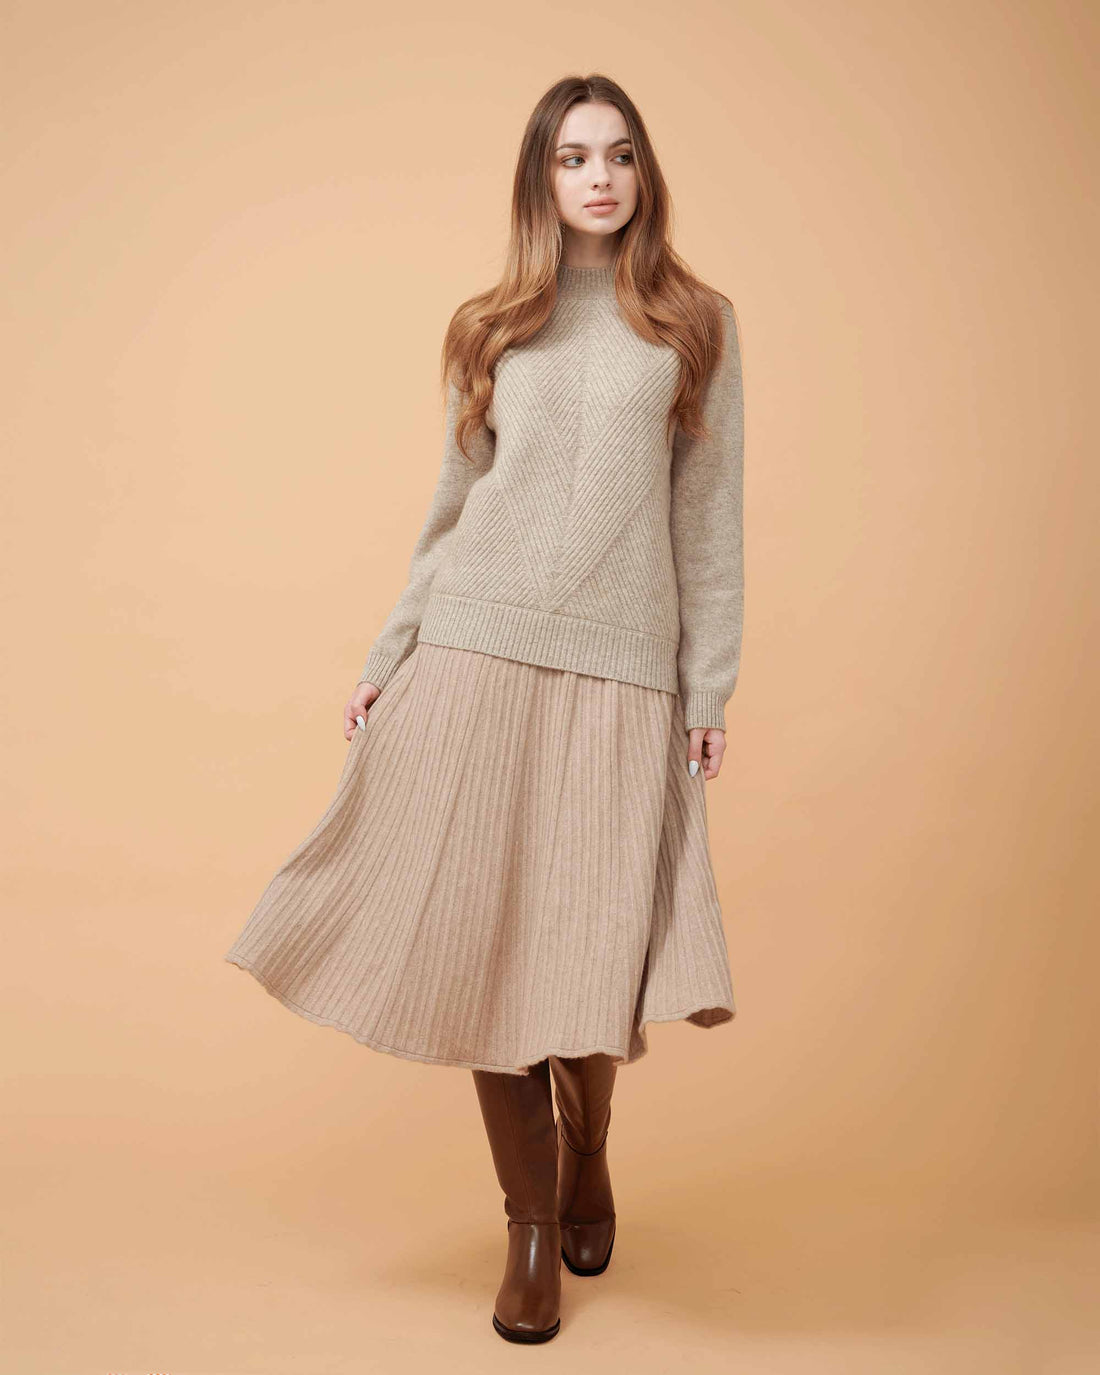 A woman wearing a beige cashmere midi skirt with pleats and a Cashmere sweater